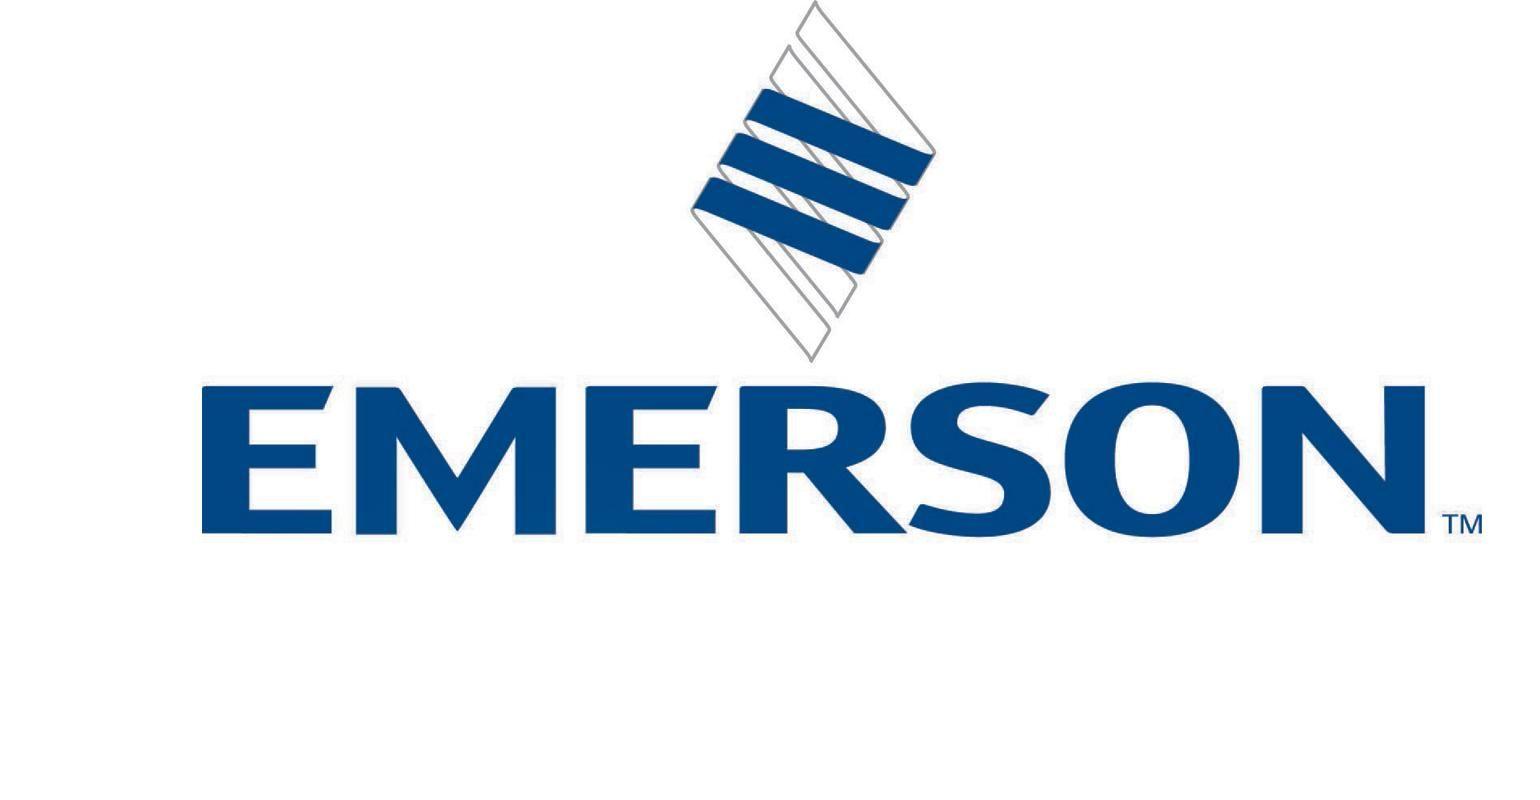 Emerson Electric Logo - Emerson Launches Consulting Service to Help Firms Combat Digital ...